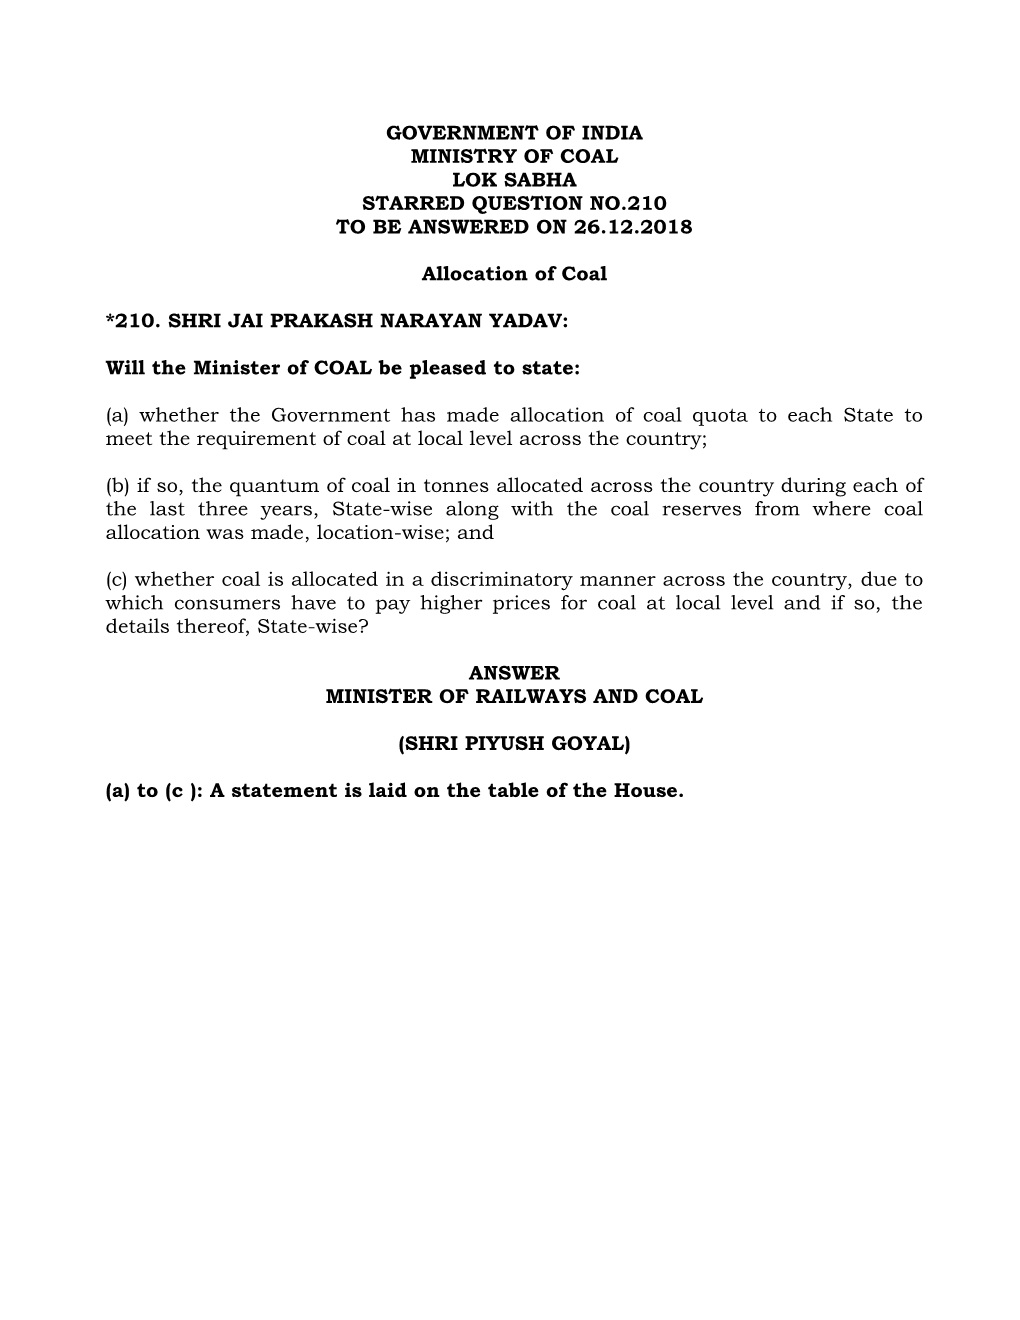 Government of India Ministry of Coal Lok Sabha Starred Question No.210 to Be Answered on 26.12.2018